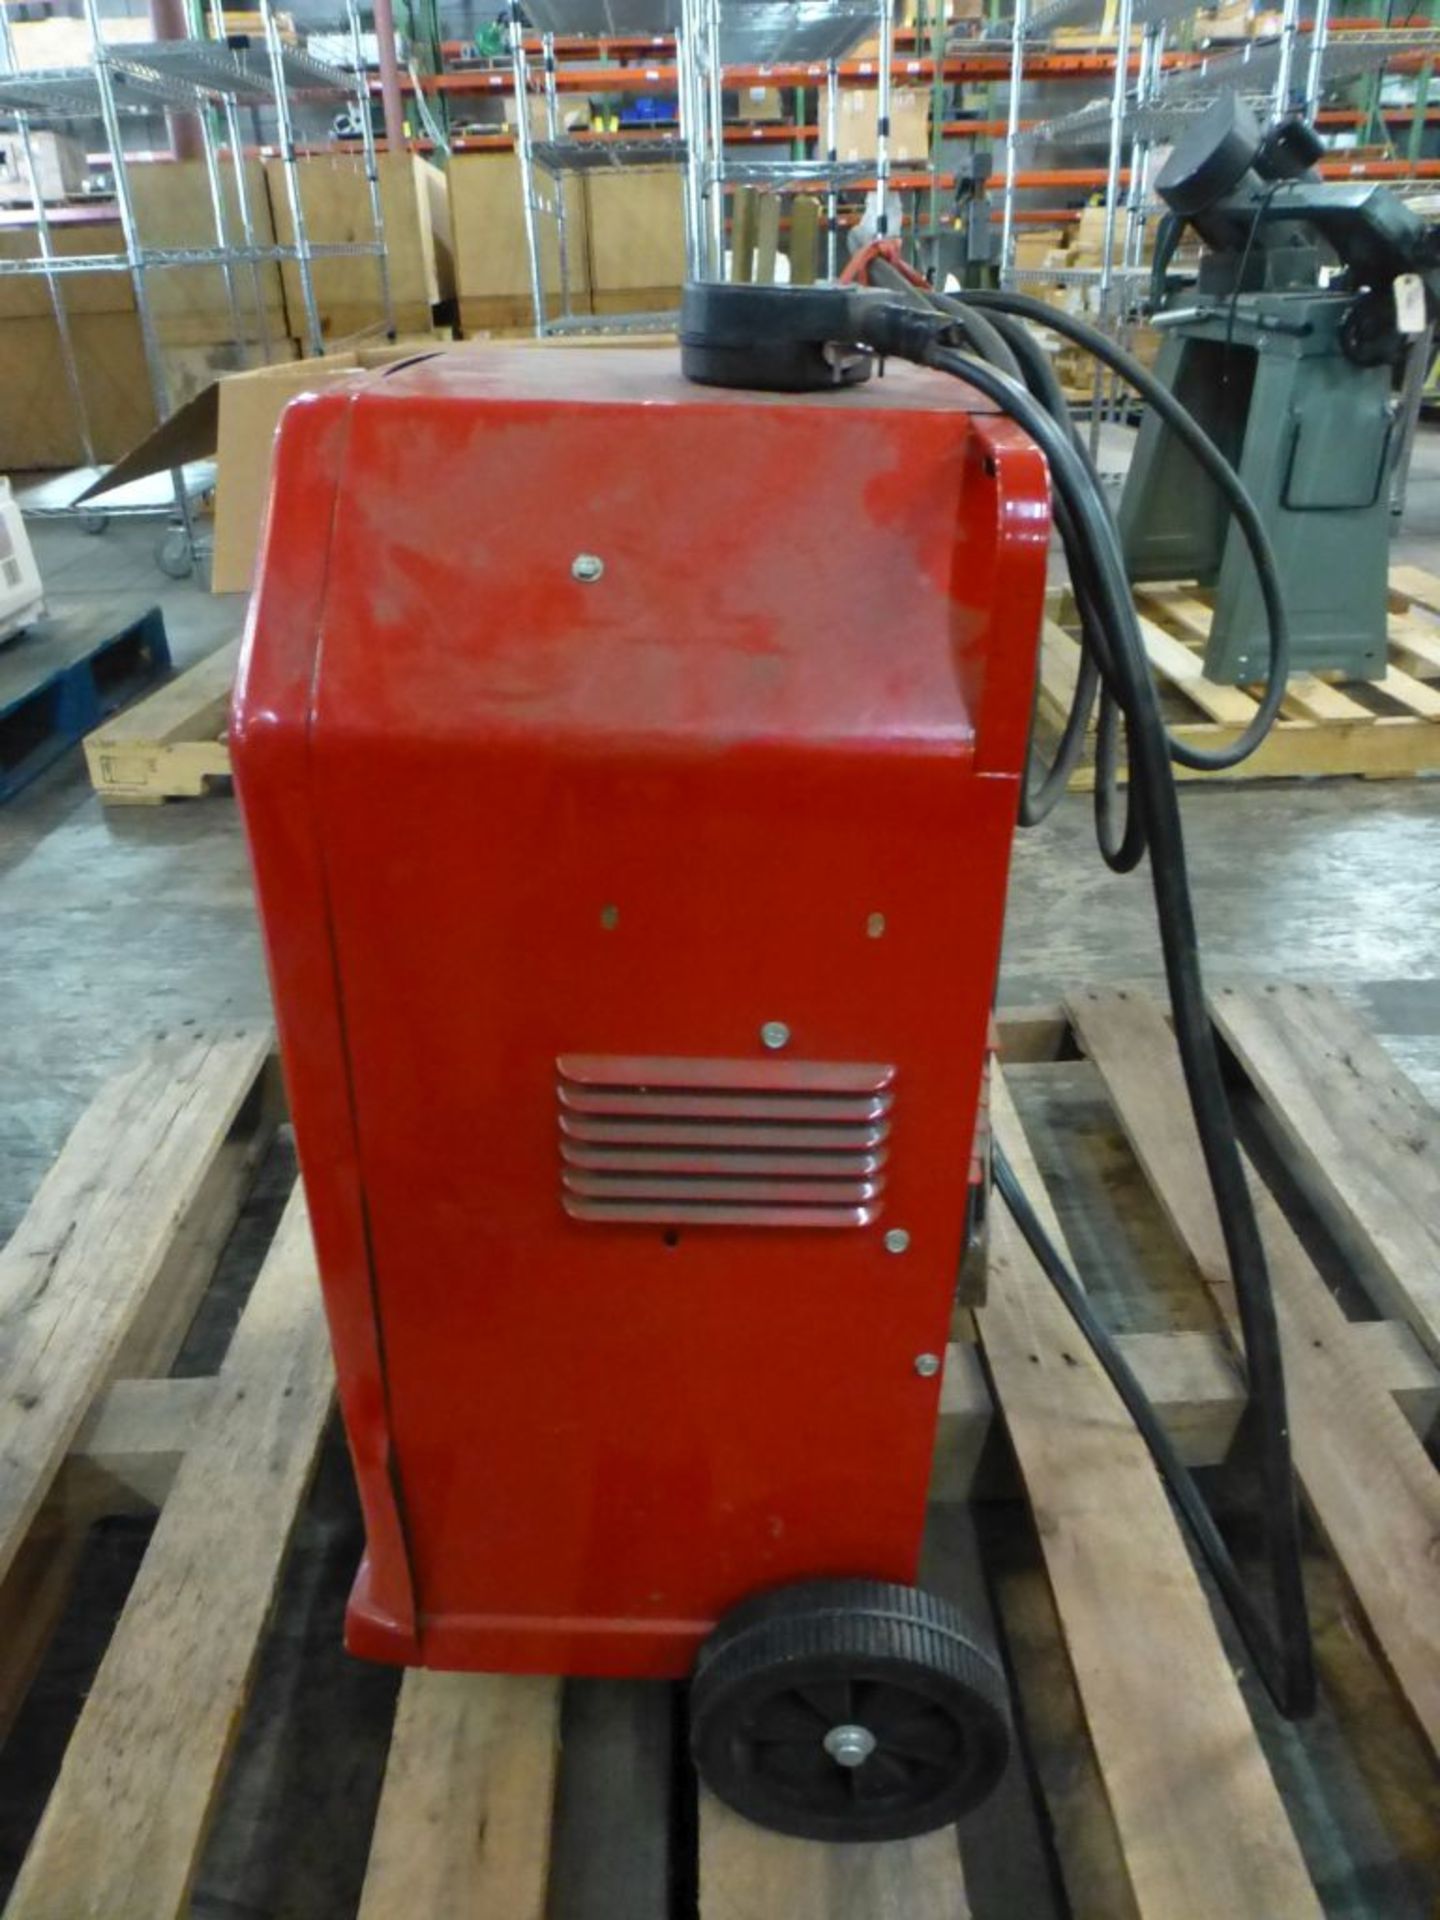 Lincoln AC-225 Arc Welder - 220V Single Phase; Tag: 218512 - Image 2 of 7